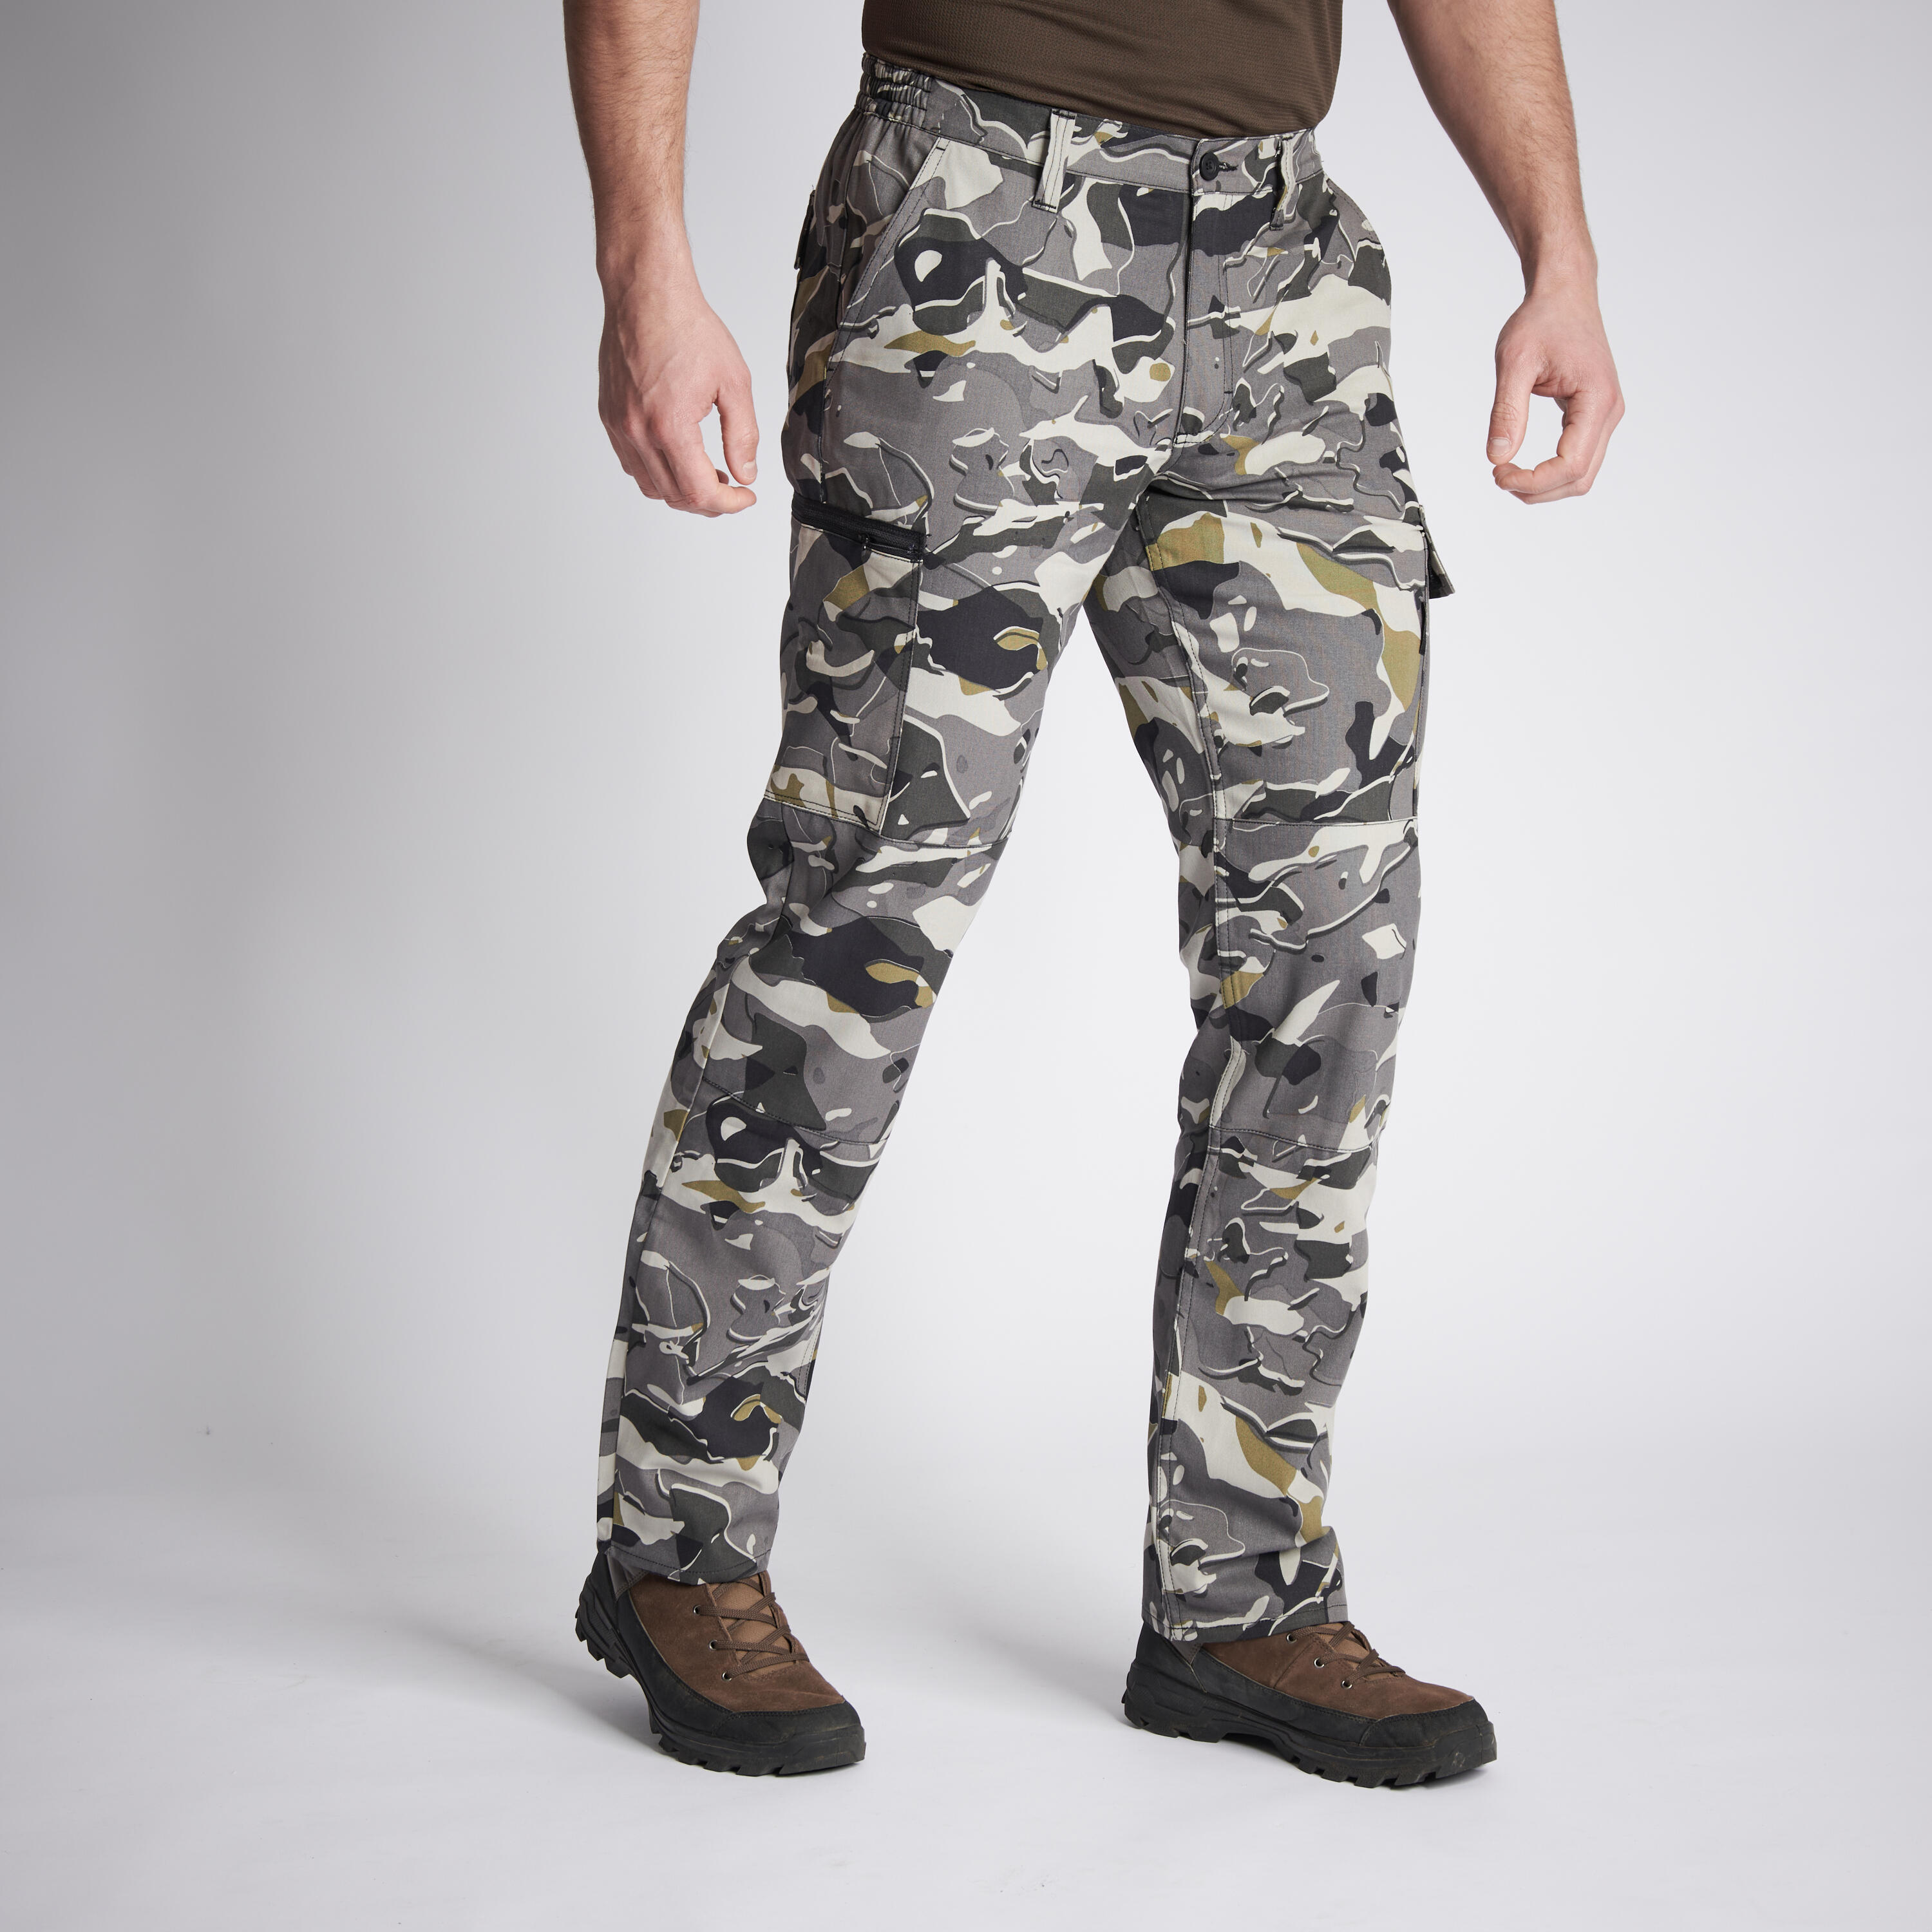 Jeans & Trousers | Army Print Cargo Pants | Freeup